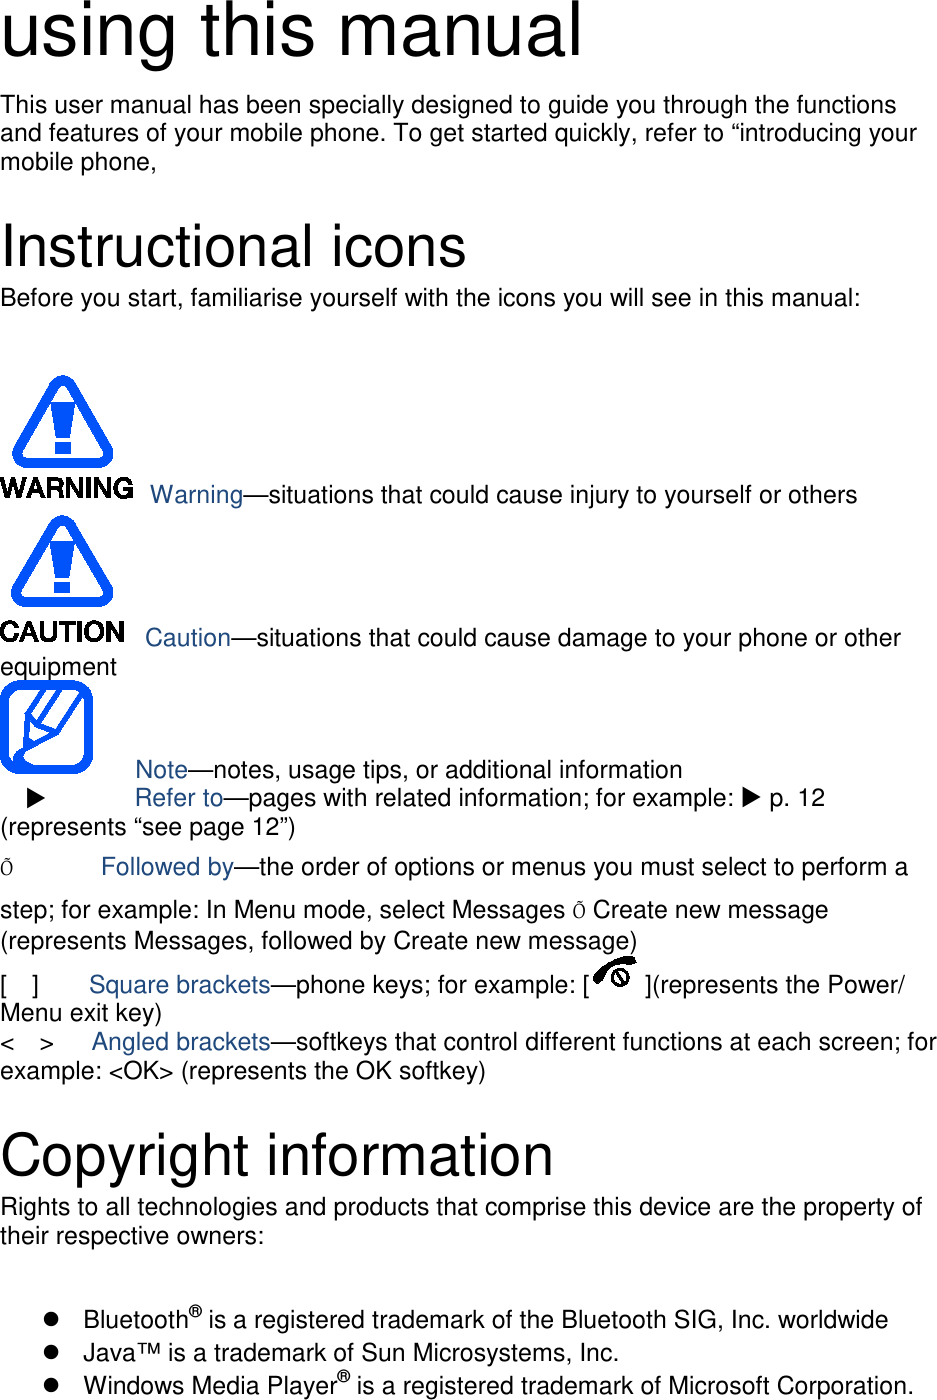 using this manual This user manual has been specially designed to guide you through the functions and features of your mobile phone. To get started quickly, refer to “introducing your mobile phone,  Instructional icons Before you start, familiarise yourself with the icons you will see in this manual:     Warning—situations that could cause injury to yourself or others  Caution—situations that could cause damage to your phone or other equipment    Note—notes, usage tips, or additional information          Refer to—pages with related information; for example:  p. 12 (represents “see page 12”) Õ       Followed by—the order of options or menus you must select to perform a step; for example: In Menu mode, select Messages Õ Create new message (represents Messages, followed by Create new message) [  ]    Square brackets—phone keys; for example: [ ](represents the Power/ Menu exit key) &lt;  &gt;   Angled brackets—softkeys that control different functions at each screen; for example: &lt;OK&gt; (represents the OK softkey)  Copyright information Rights to all technologies and products that comprise this device are the property of their respective owners:   Bluetooth® is a registered trademark of the Bluetooth SIG, Inc. worldwide  Java™ is a trademark of Sun Microsystems, Inc.  Windows Media Player® is a registered trademark of Microsoft Corporation. 